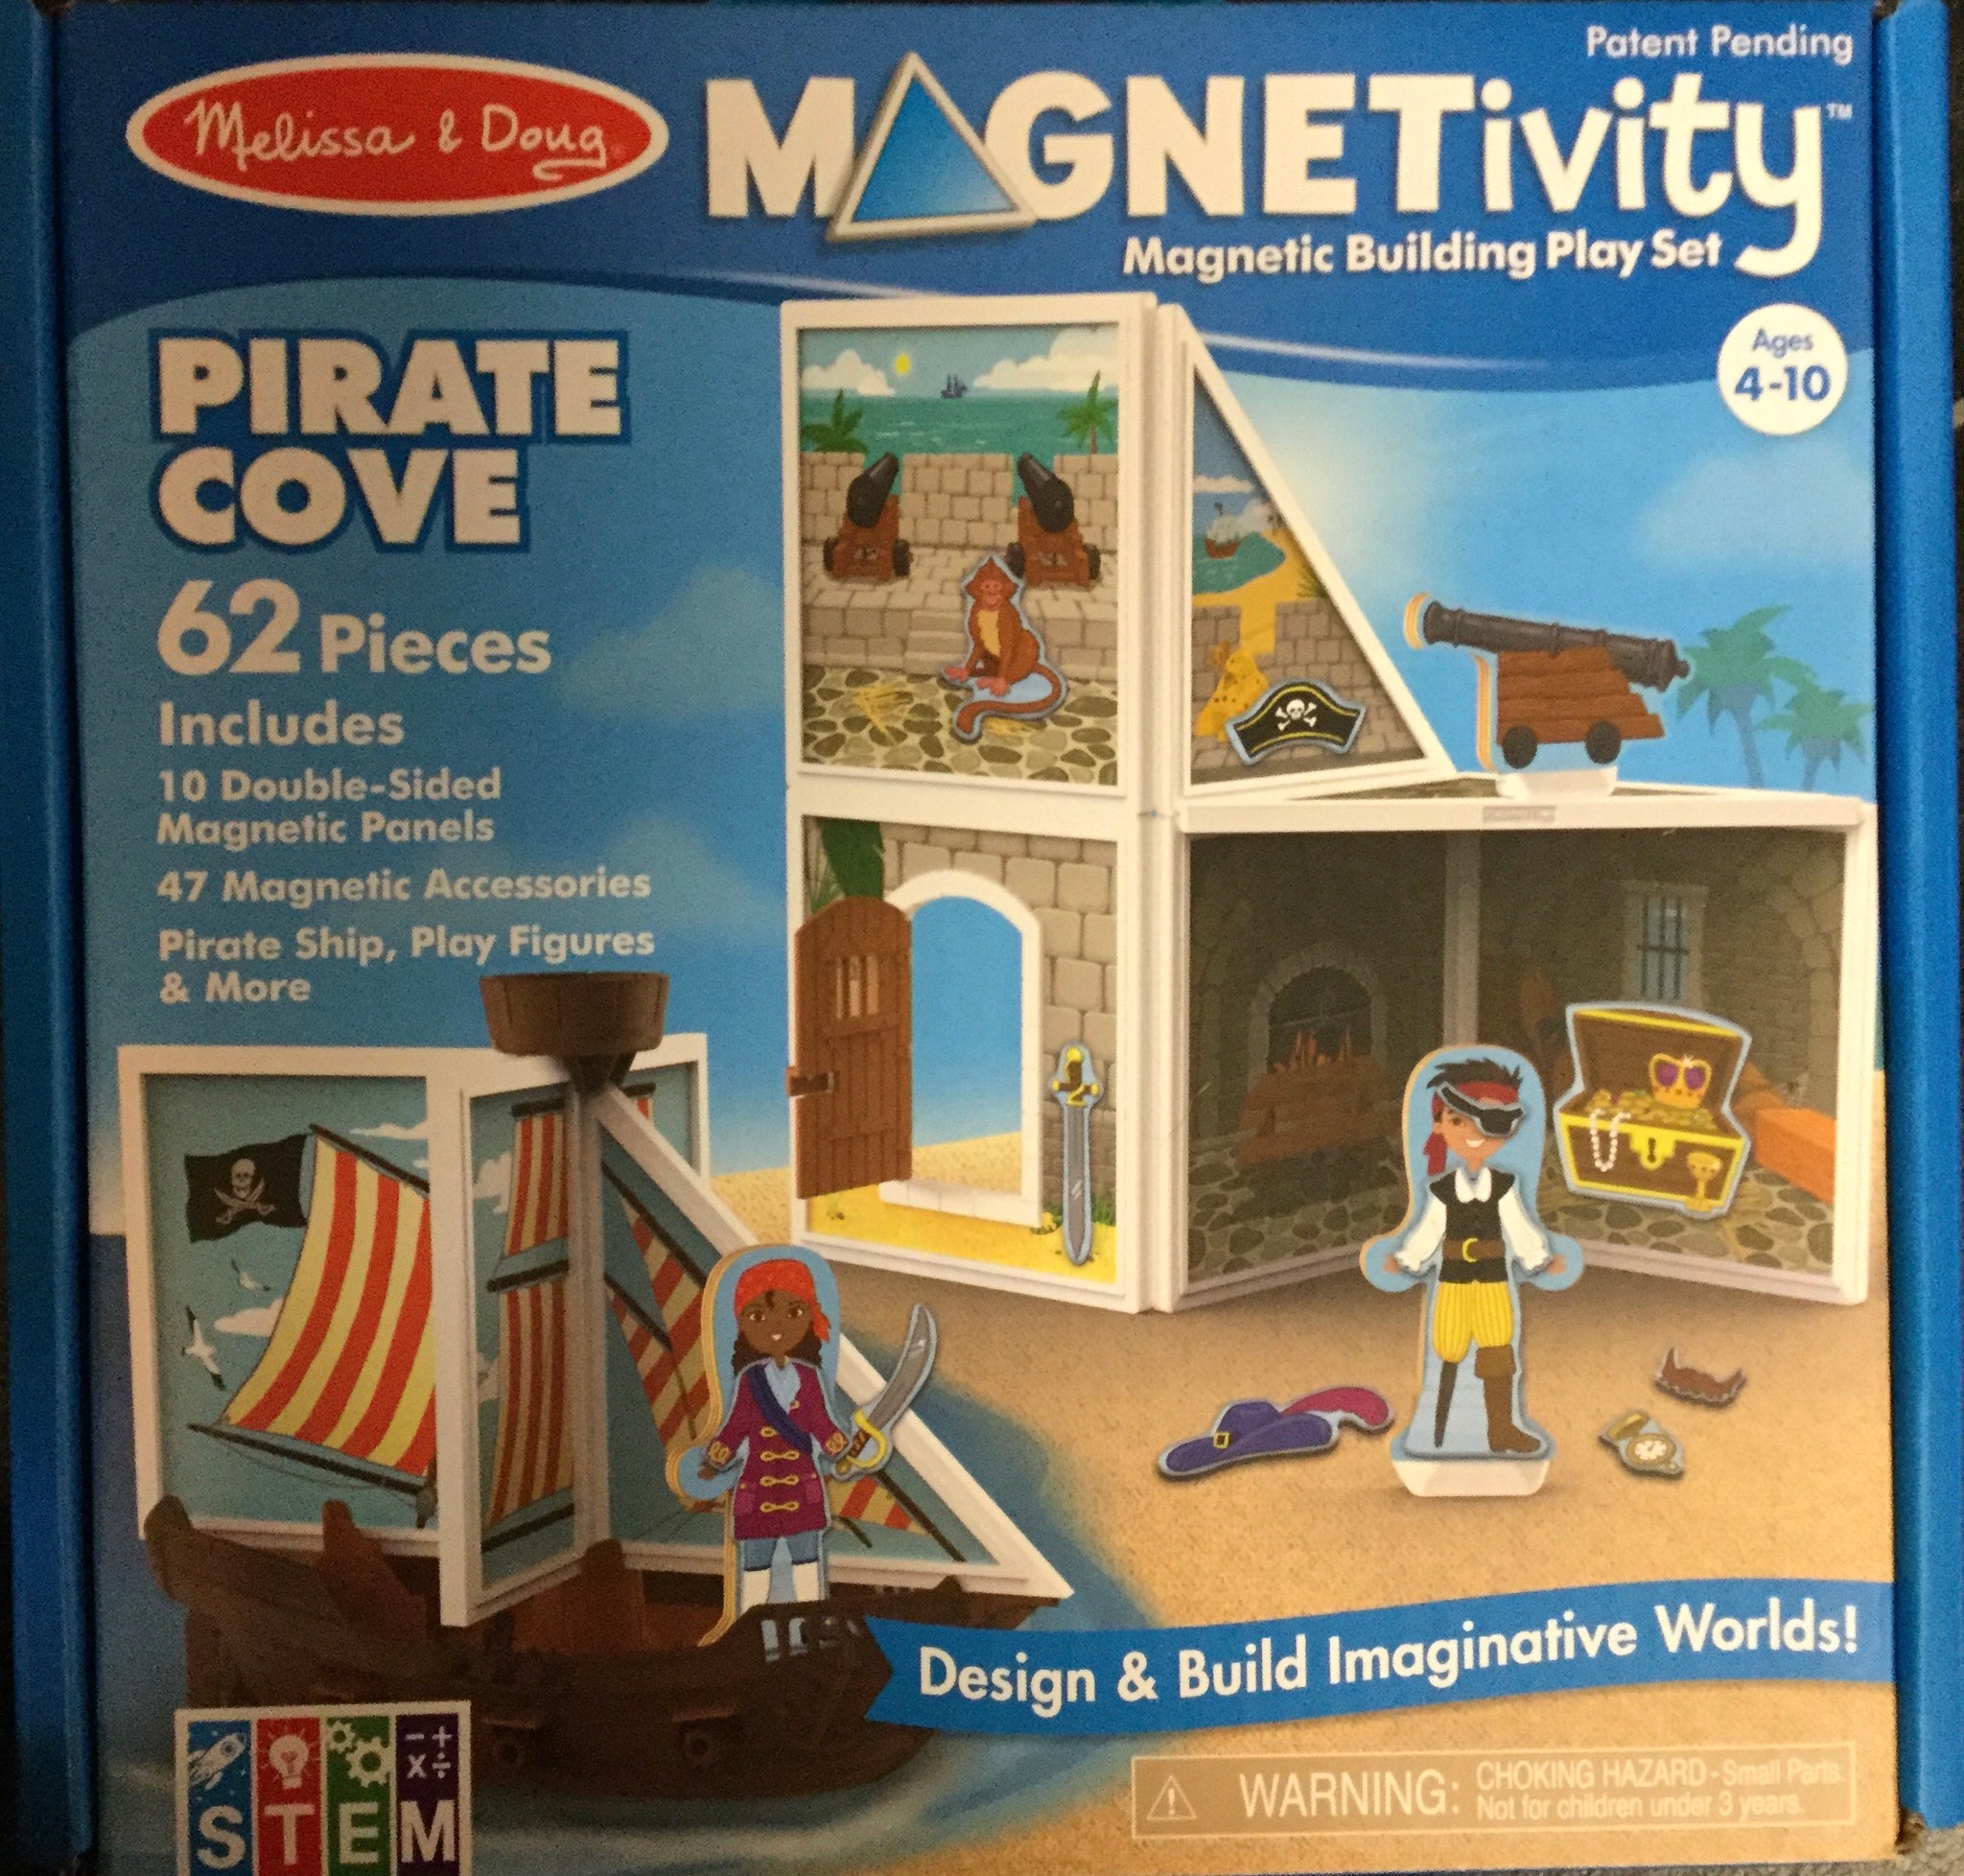 Magnetivity Magnetic Building Play Set  "Pirate Cove"